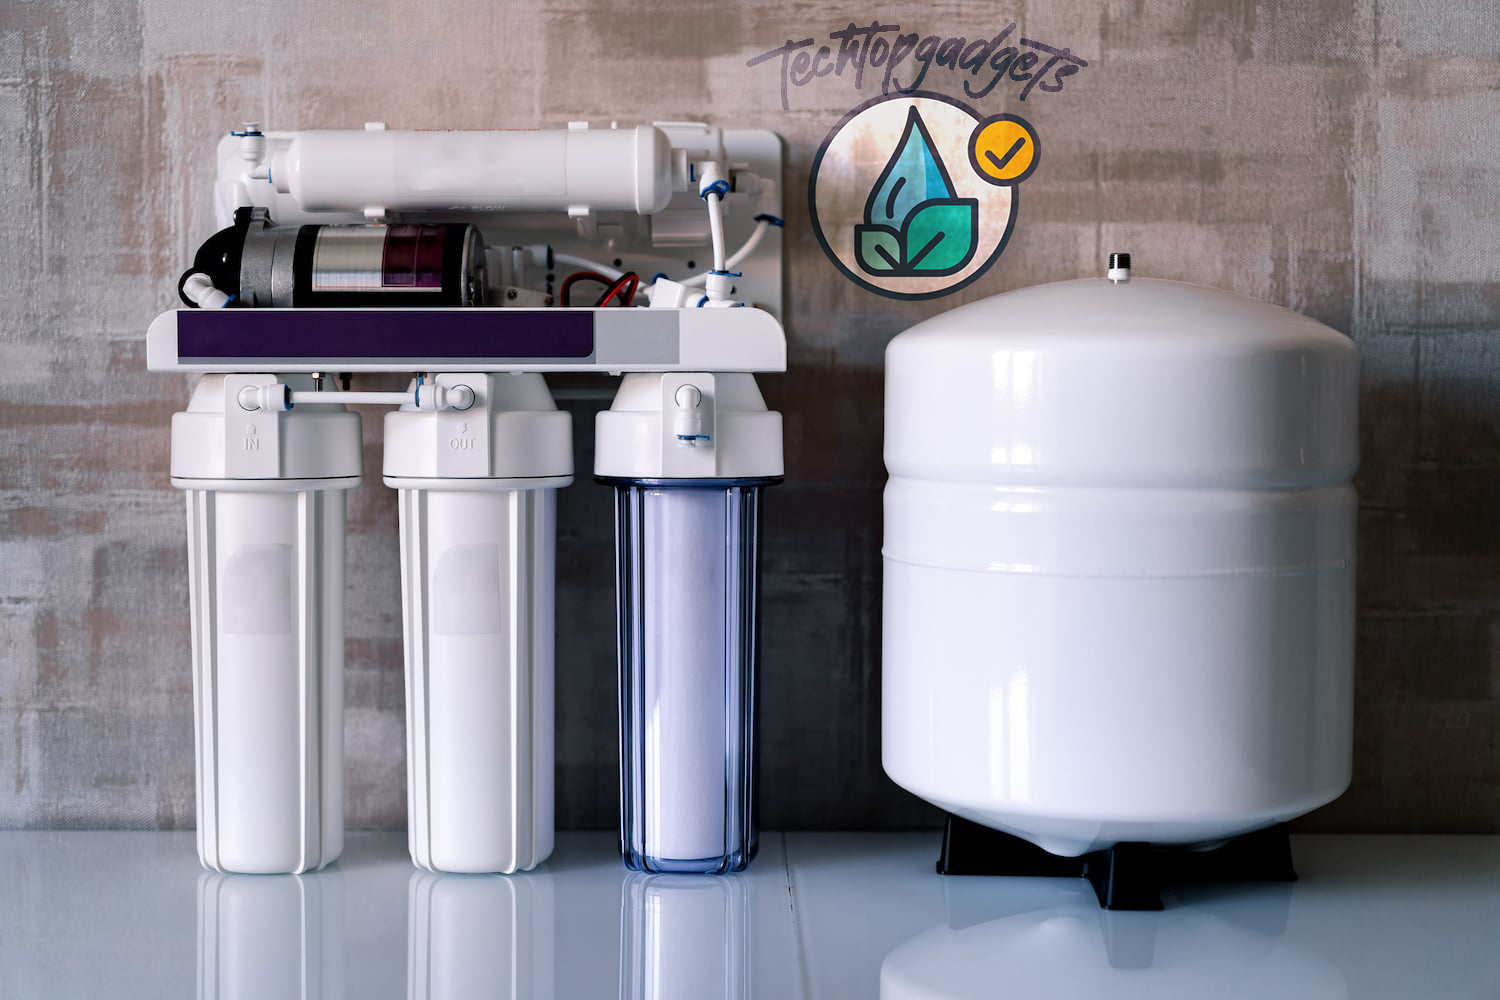 The Techtopgadgets water softener and filtration system is the best solution for ensuring pure and soft water in your home, featuring state-of-the-art technology for efficient water treatment.